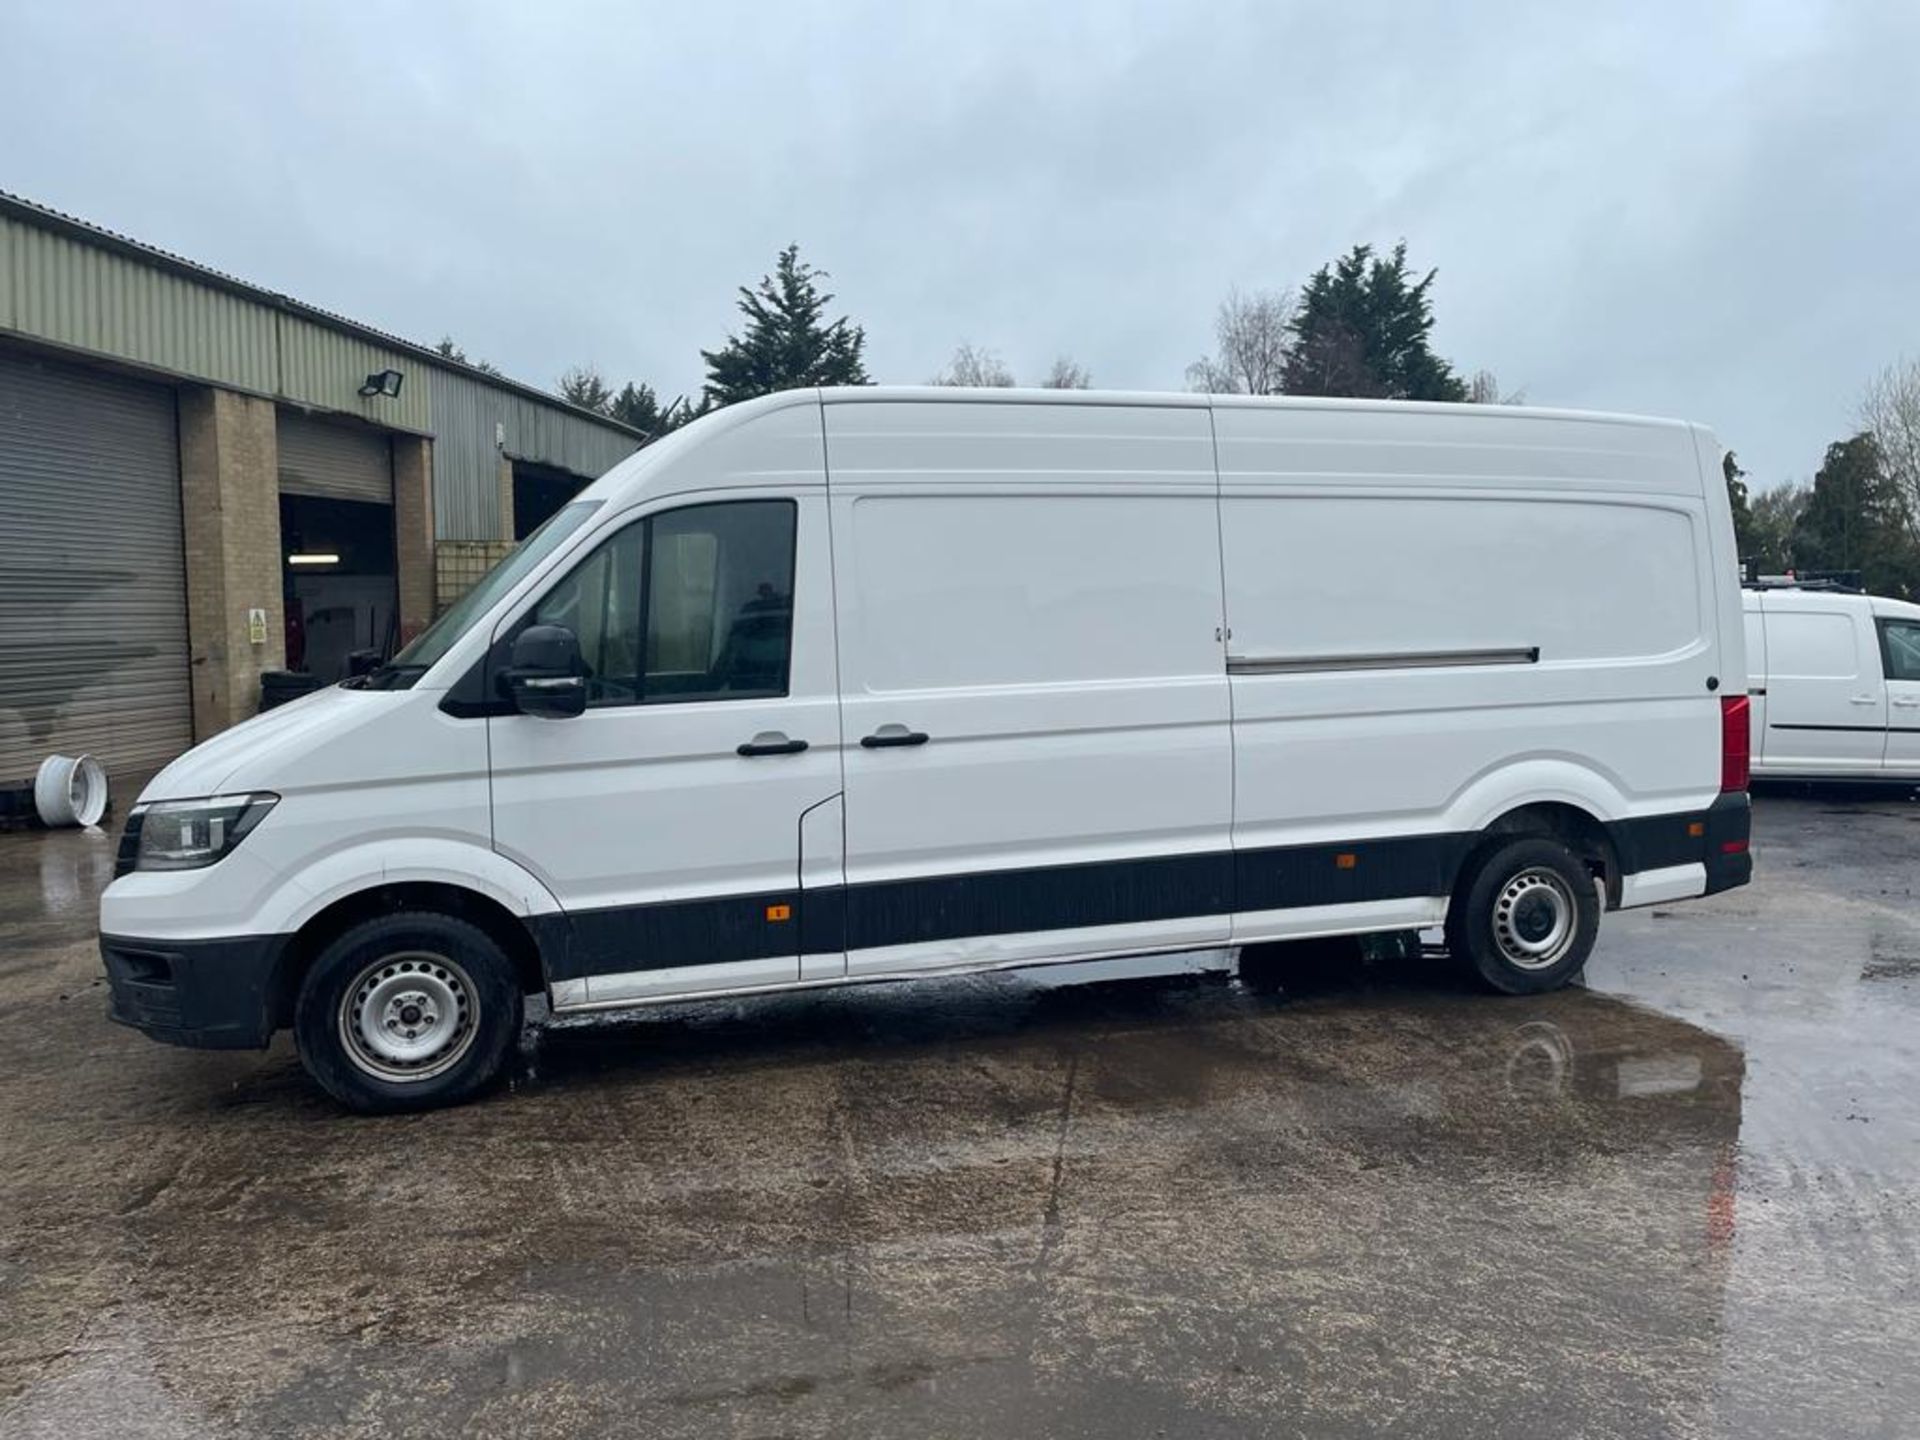 2019 Volkswagen Crafter CR35 TDI Blue Motion - Euro 6 ULEZ Compliant - Image 2 of 8